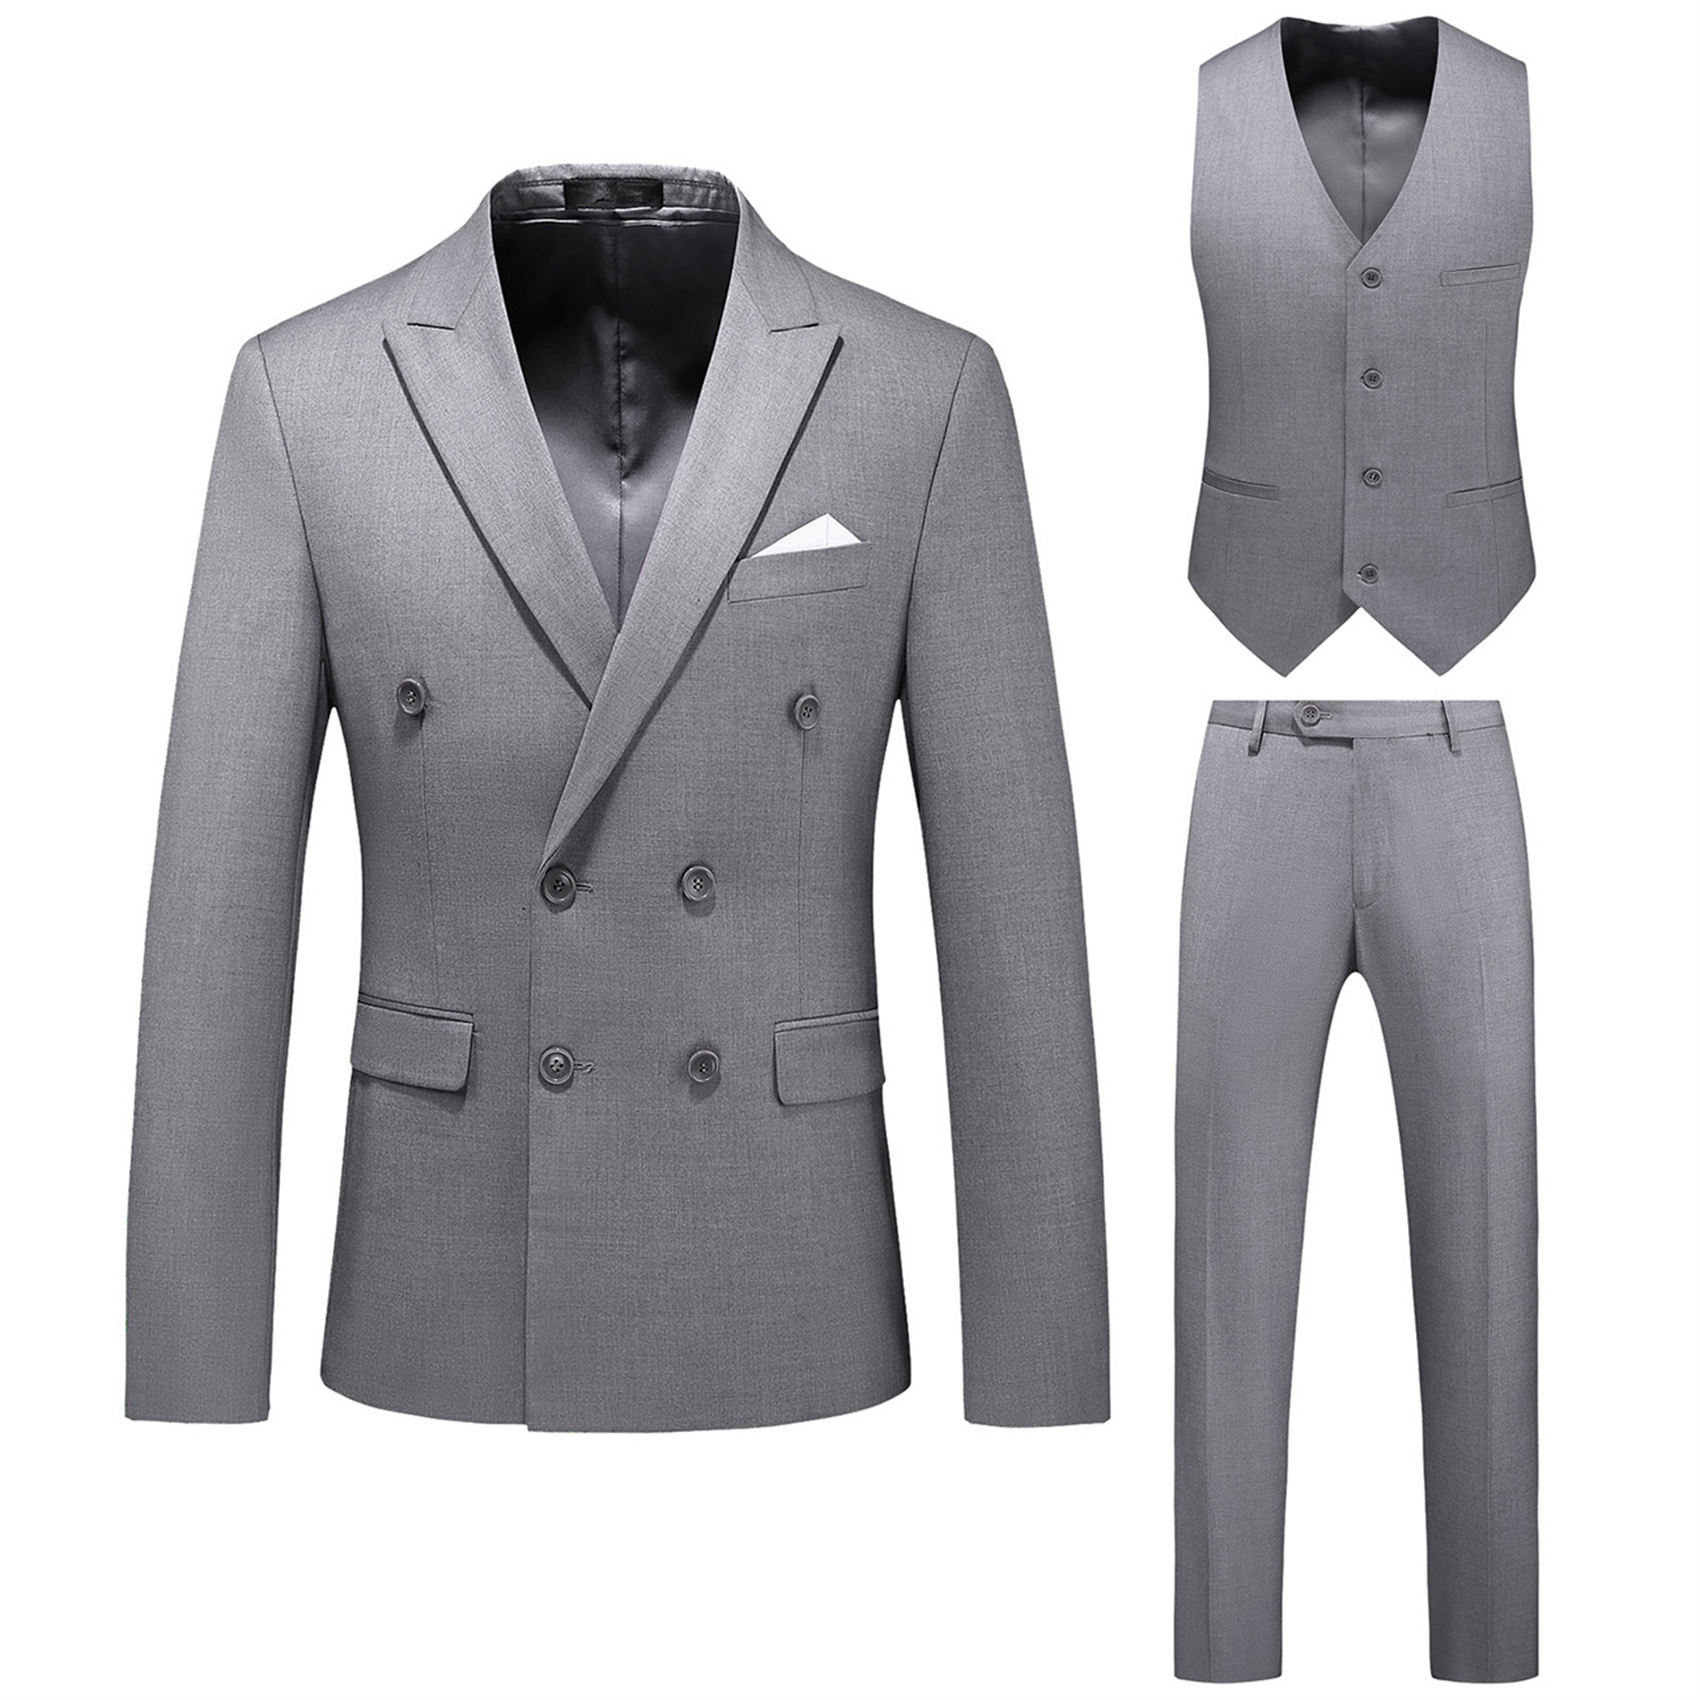 3 Piece Double Breasted Suit for Men, Slim Fit, Light Grey